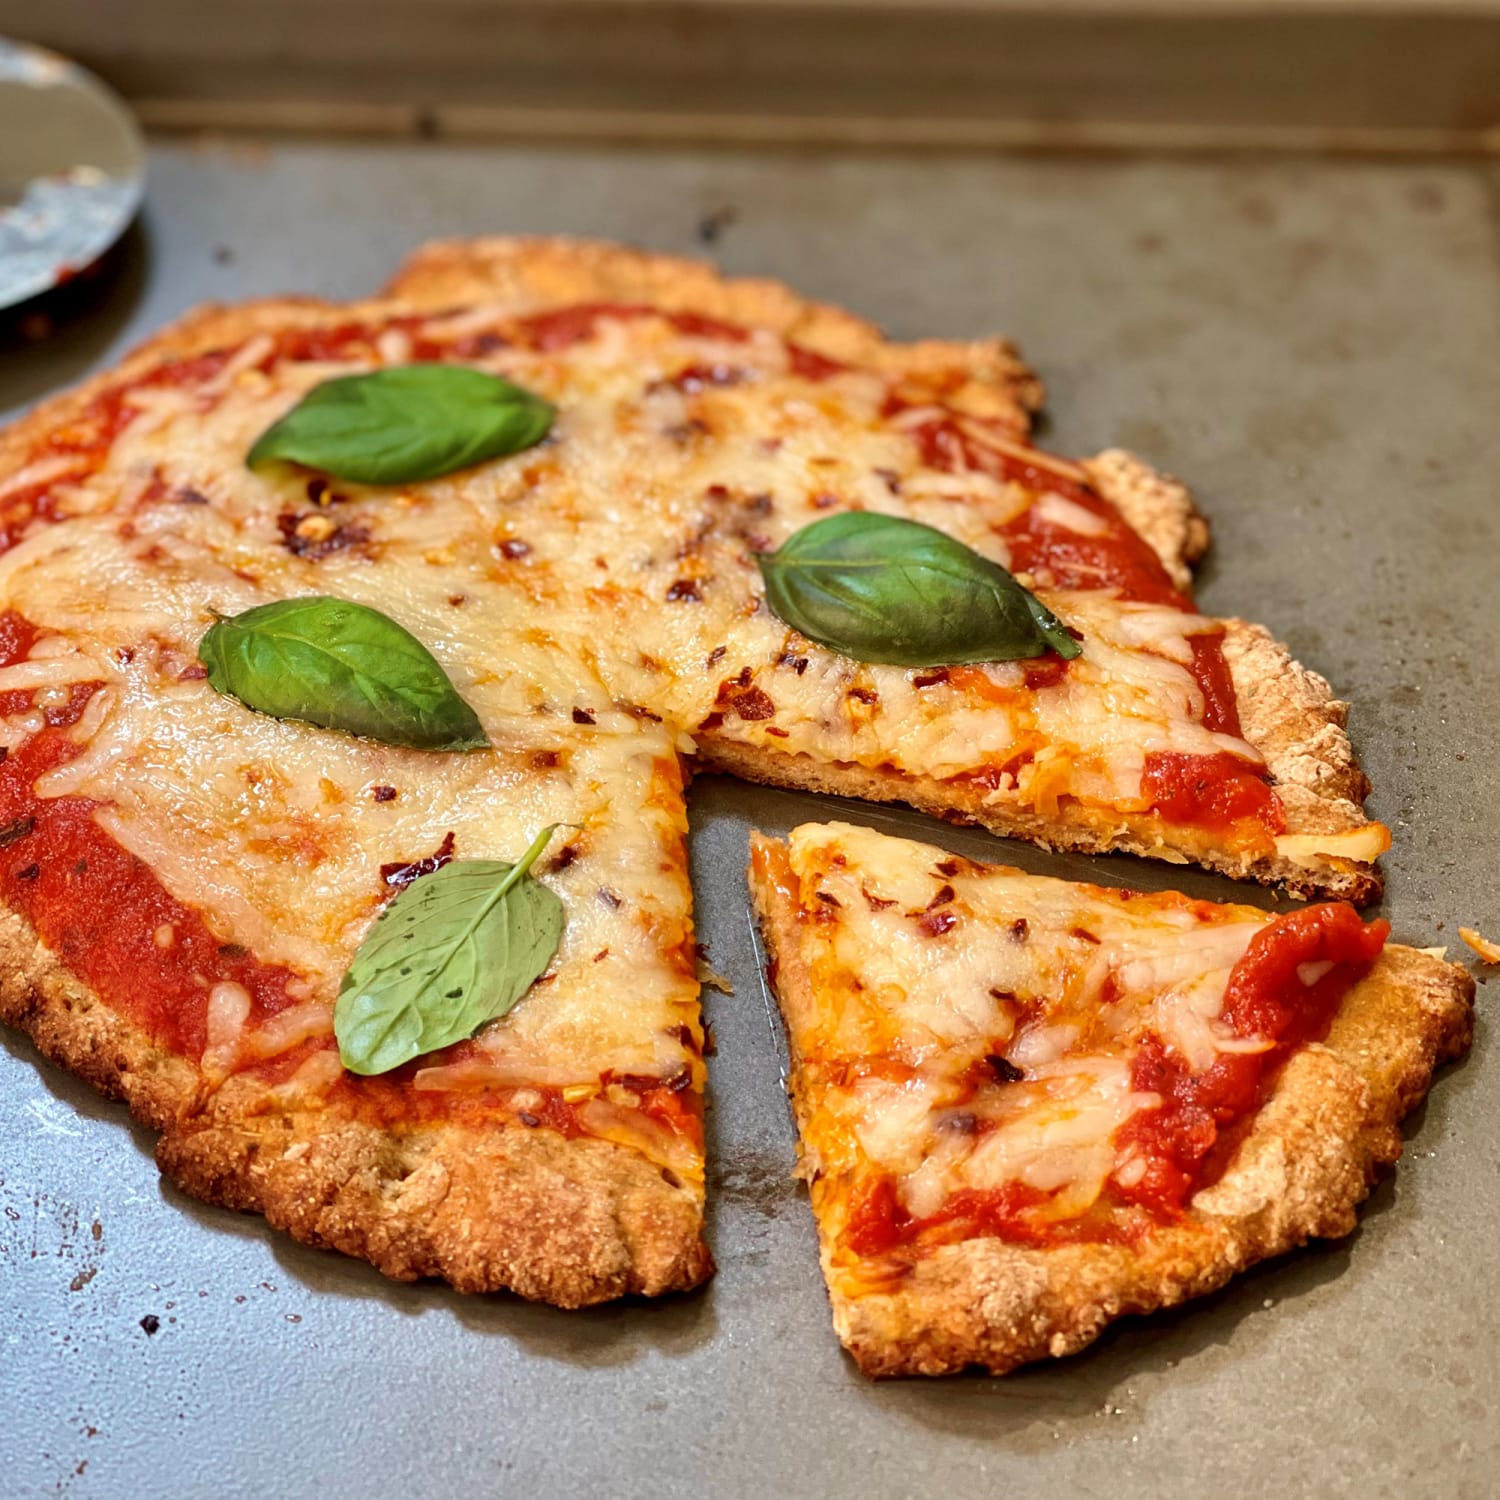 Joy Bauer's Personal Cheese Pizza Recipe